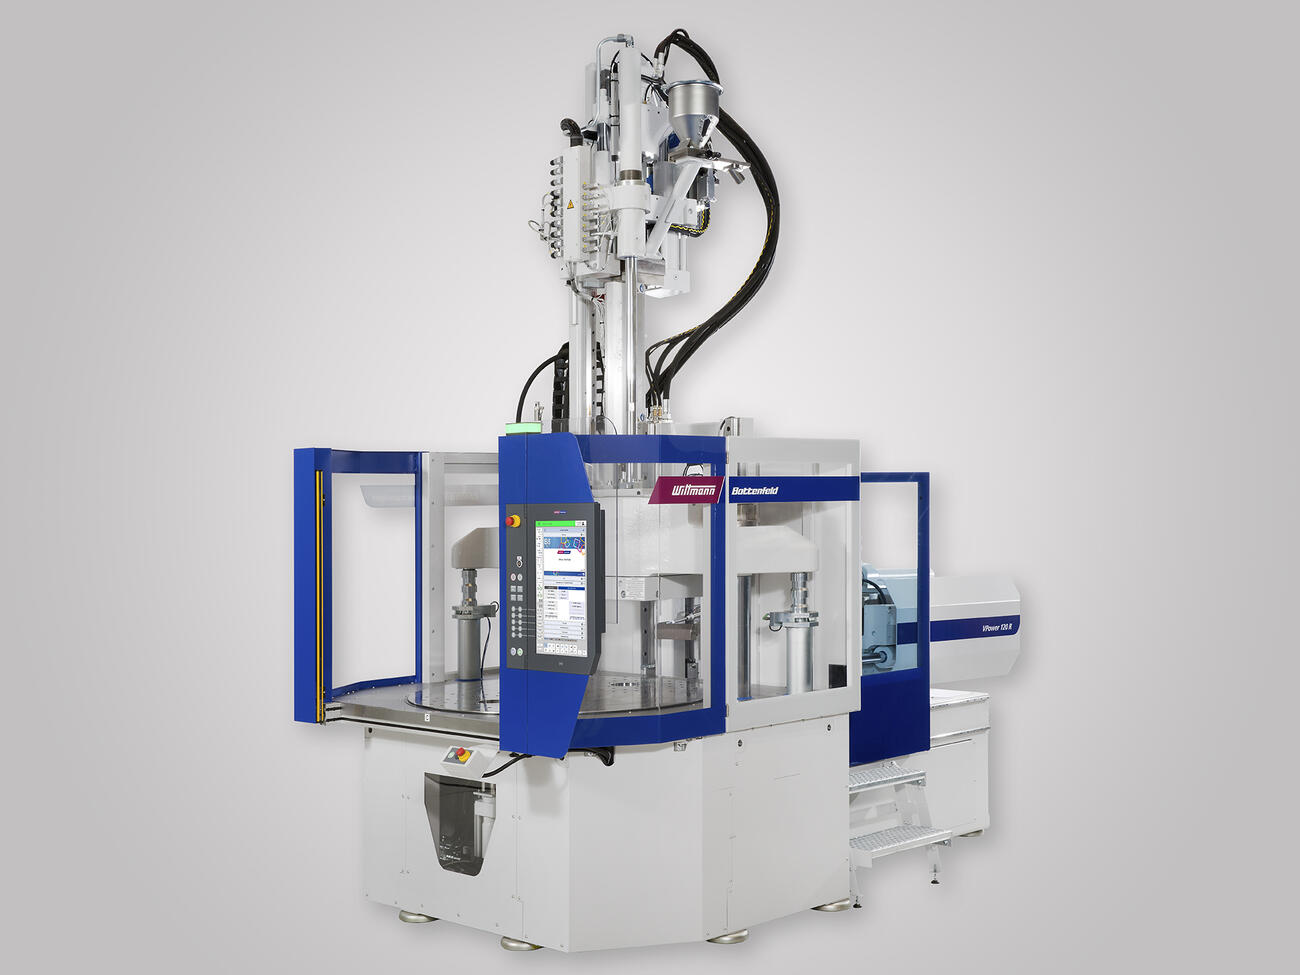 VPower 120 COMBIMOULD at the K'2019